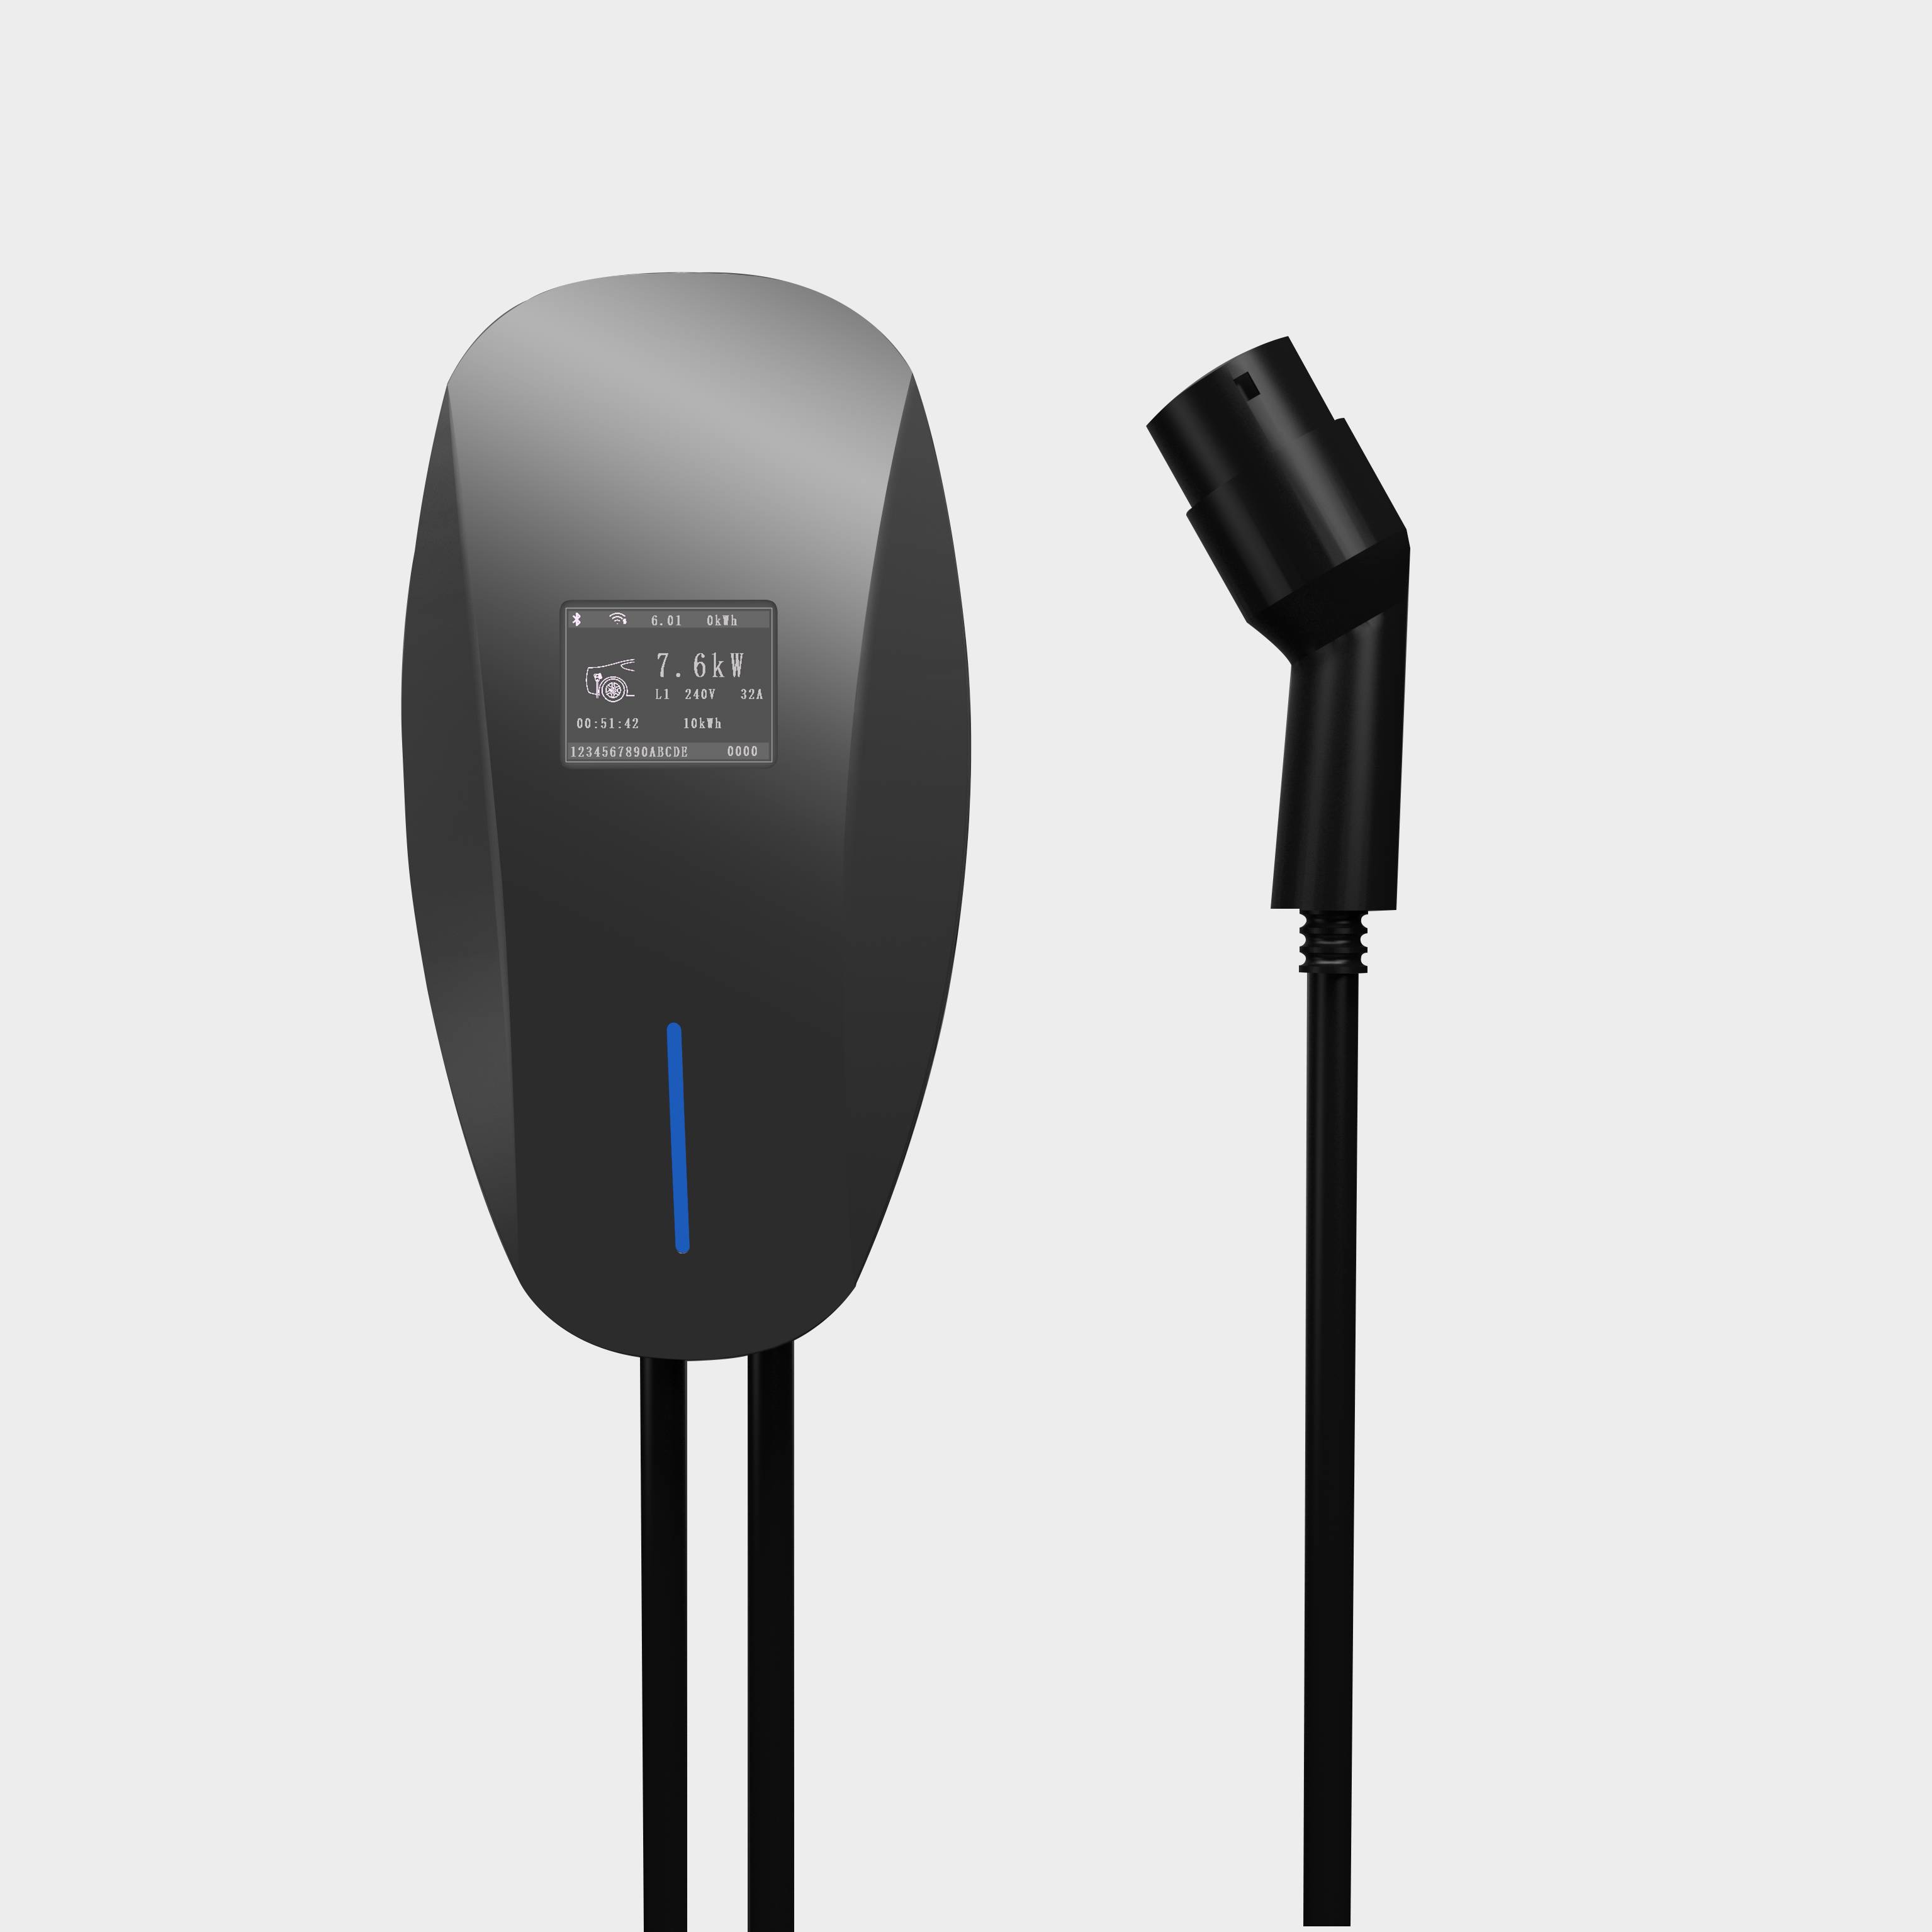 https://www.wyevcharger.com/ac-ev-charge-stations-hm-series-product/